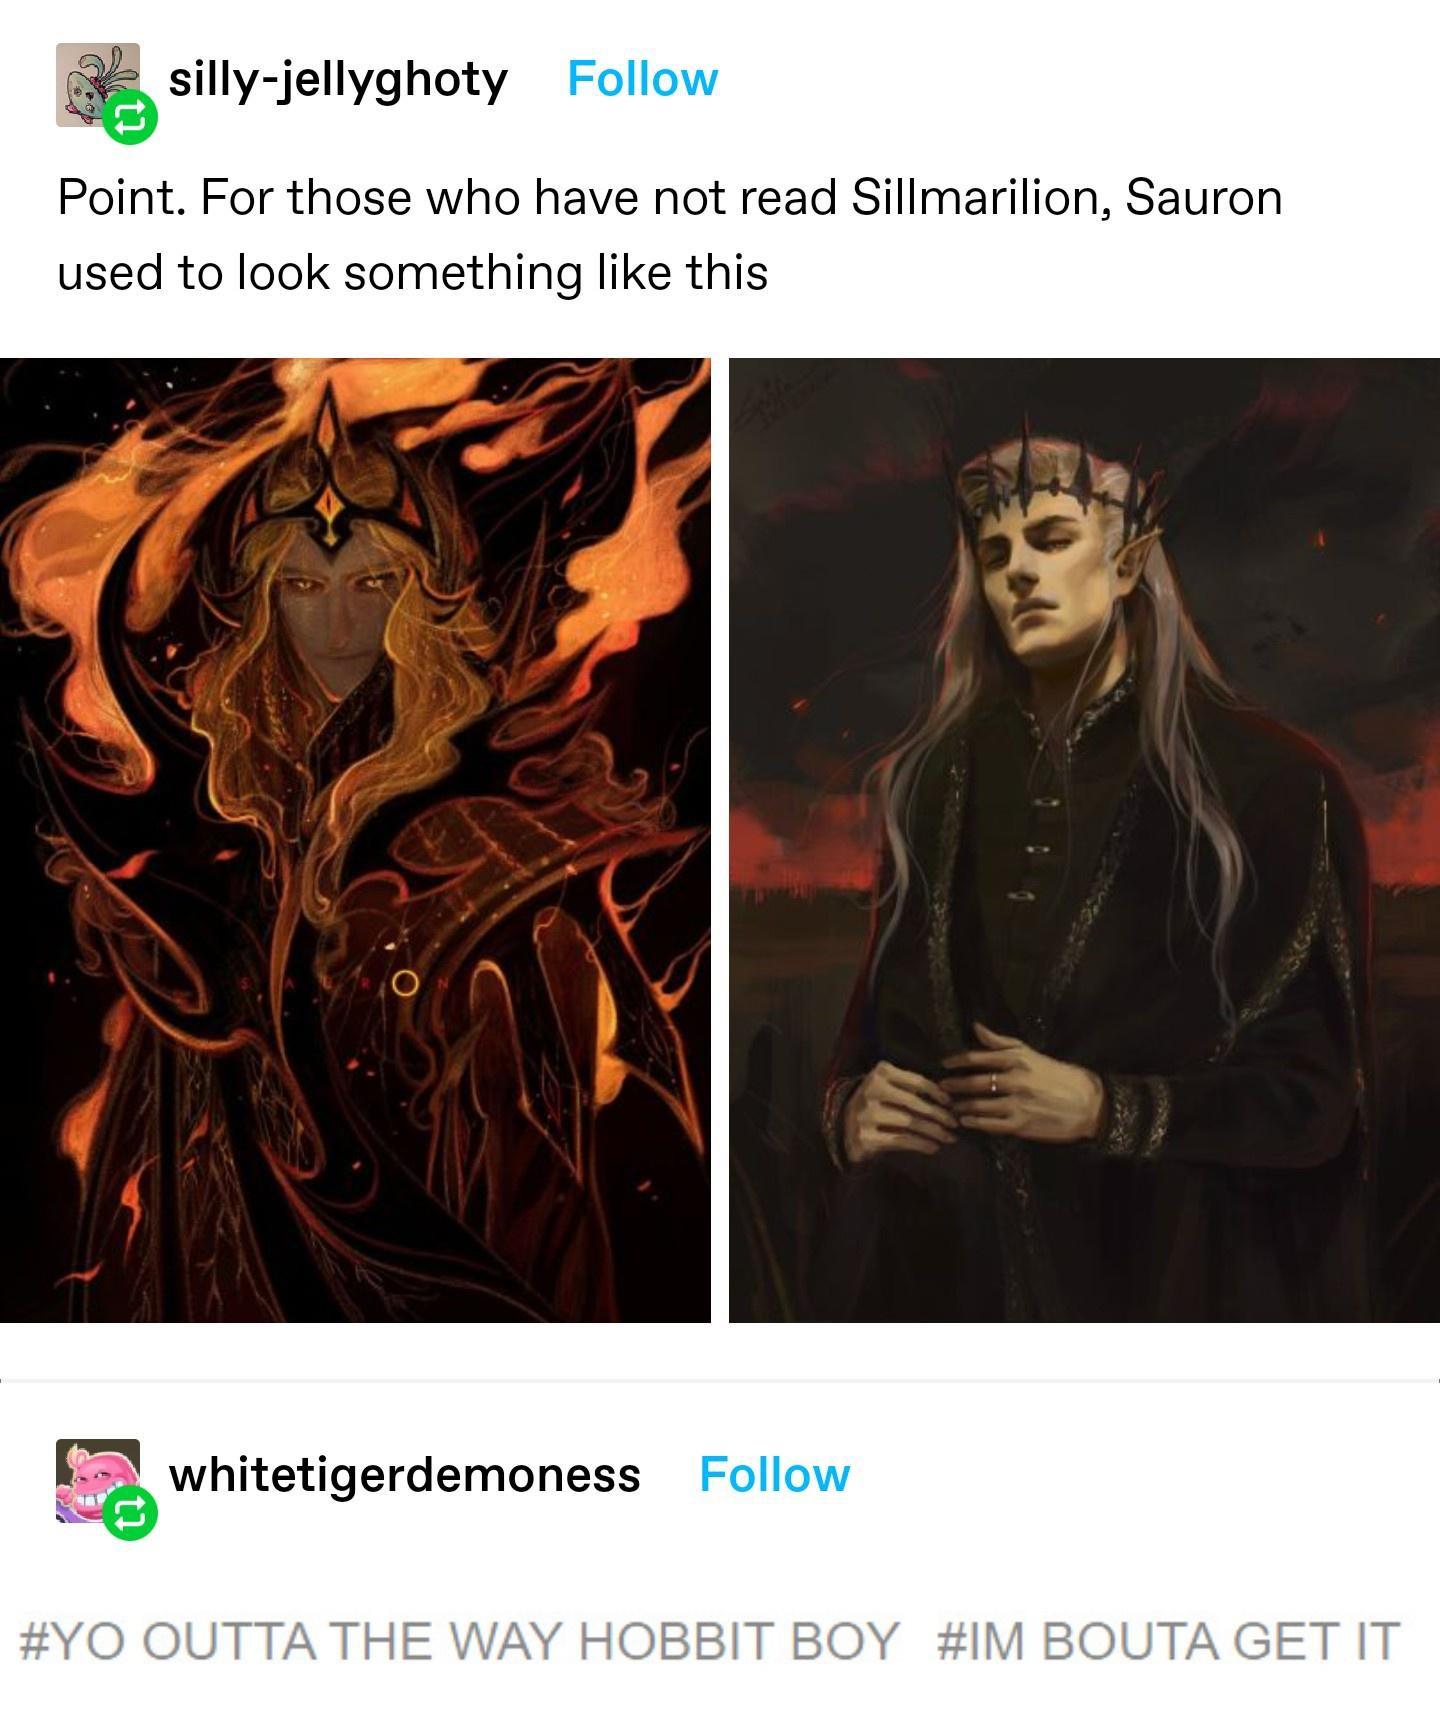 sexy sauron - sillyjellyghoty Point. For those who have not read Sillmarilion, Sauron used to look something this whitetigerdemoness Outta The Way Hobbit Boy Bouta Get It